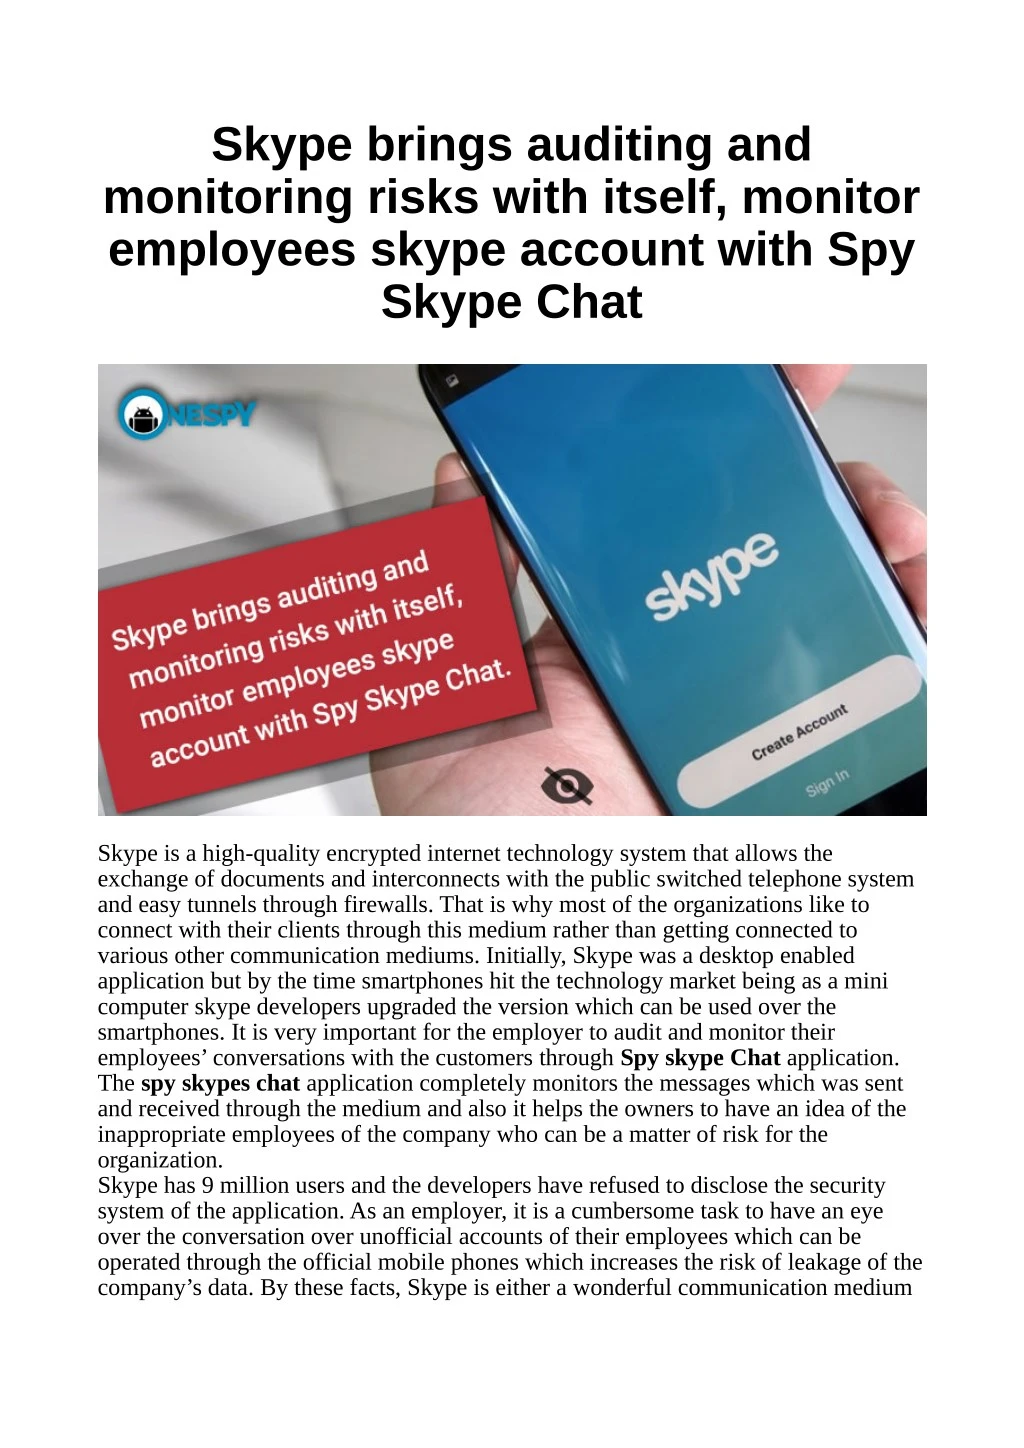 skype brings auditing and monitoring risks with